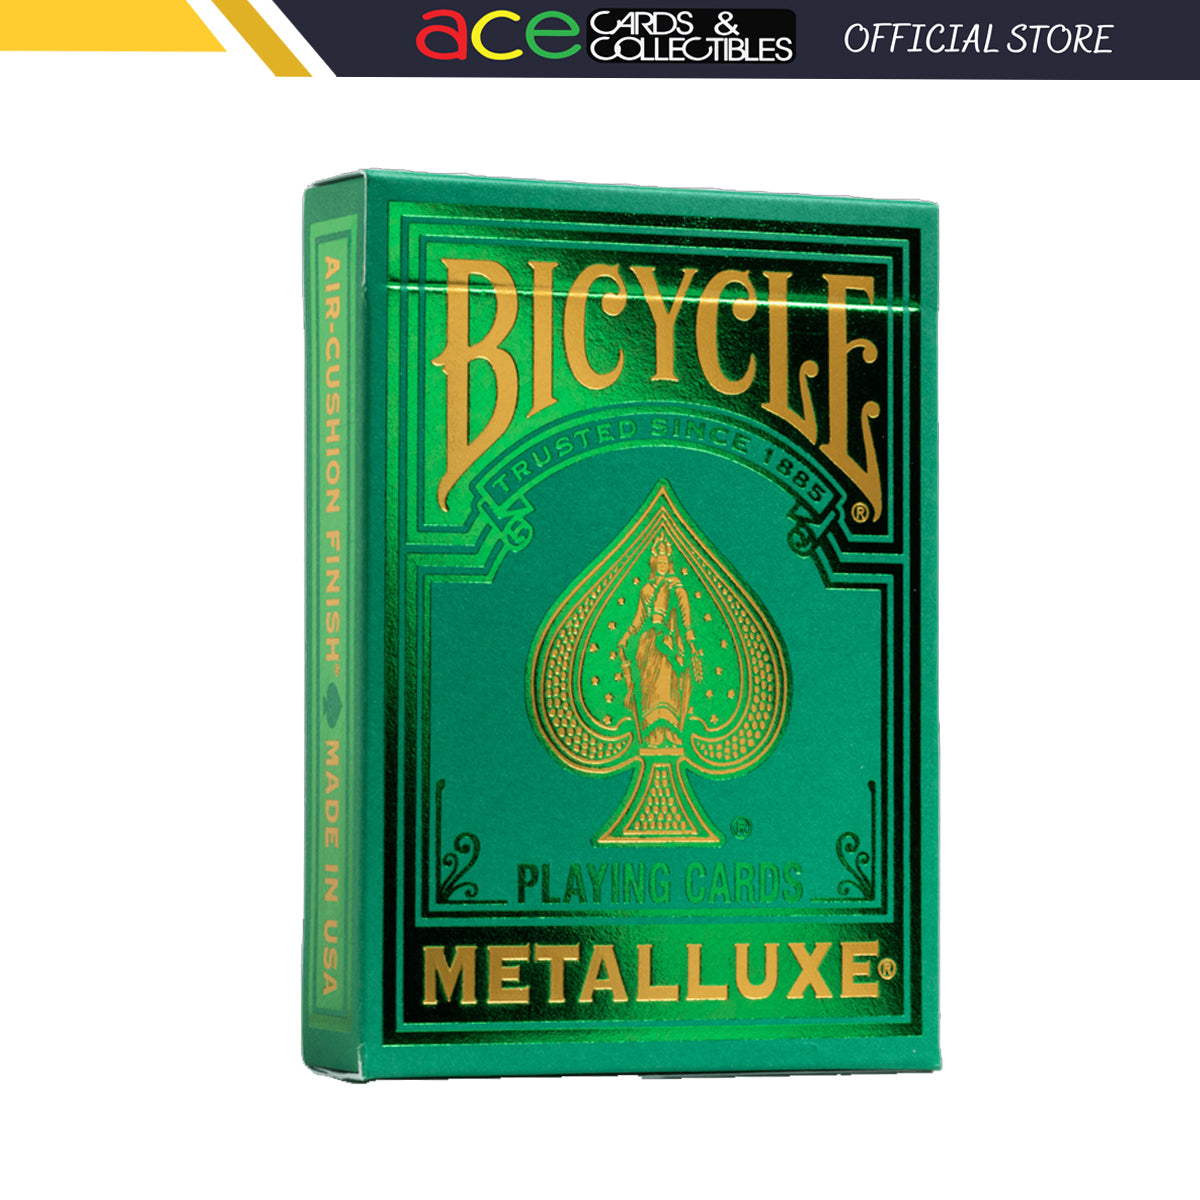 Bicycle Metalluxe Green Playing Cards-United States Playing Cards Company-Ace Cards & Collectibles